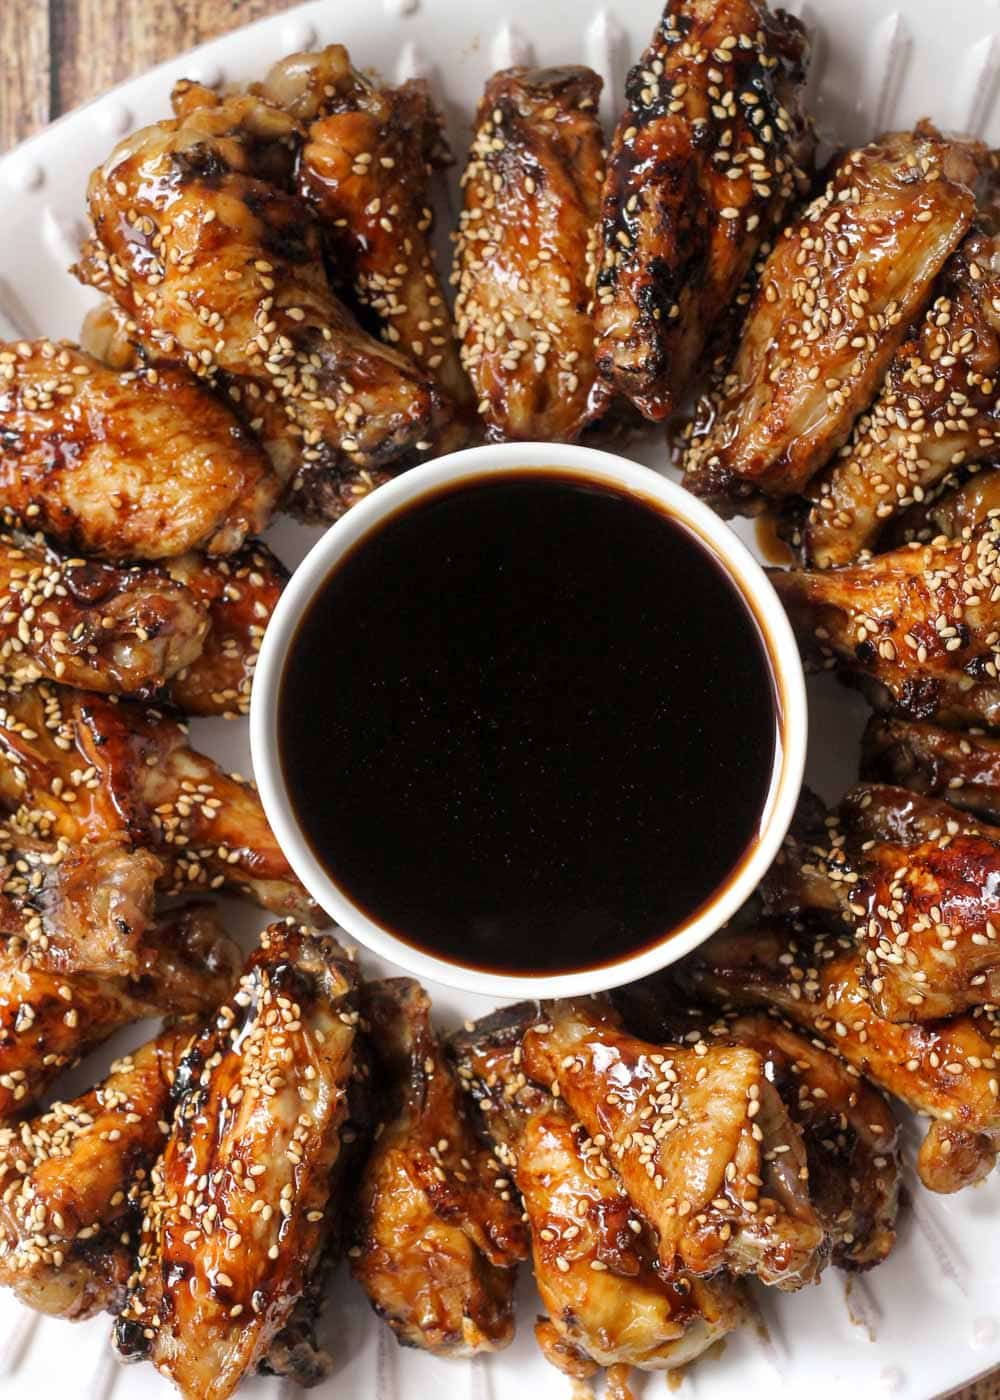 Buffalo wings - a plate of teriyaki chicken wings served with dipping sauce.